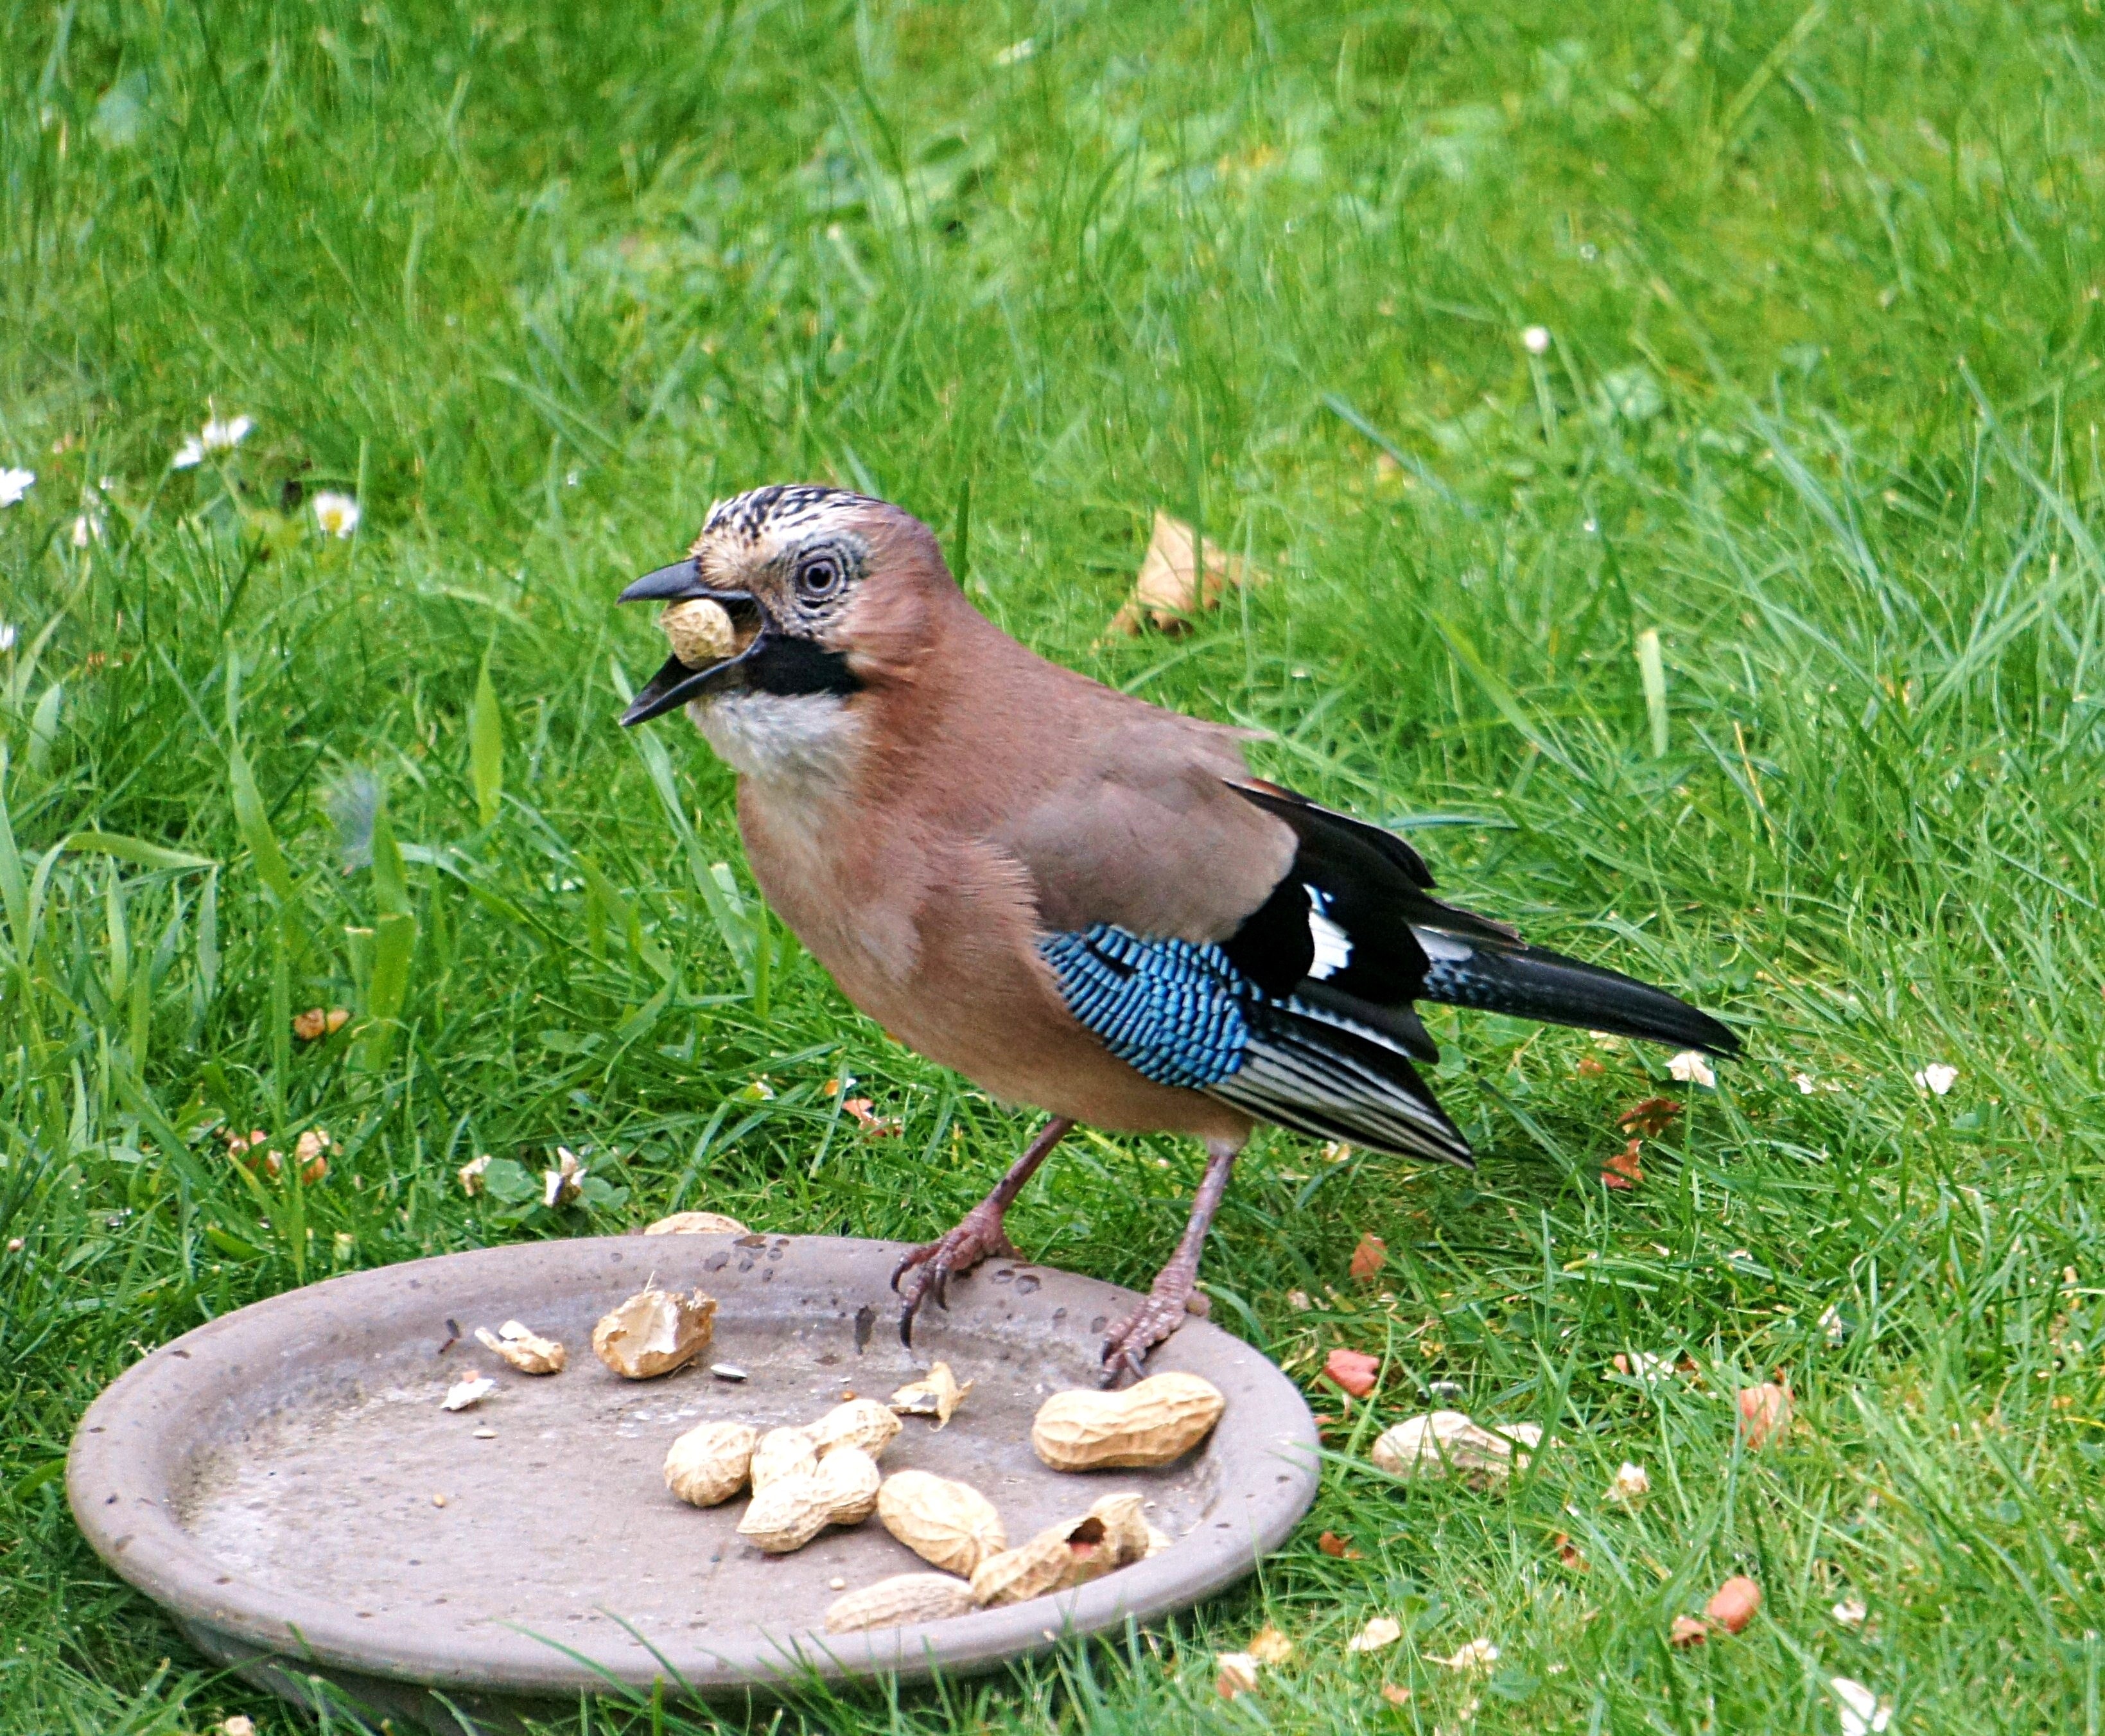 brown and black bird on brown ceramic plate with peanuts